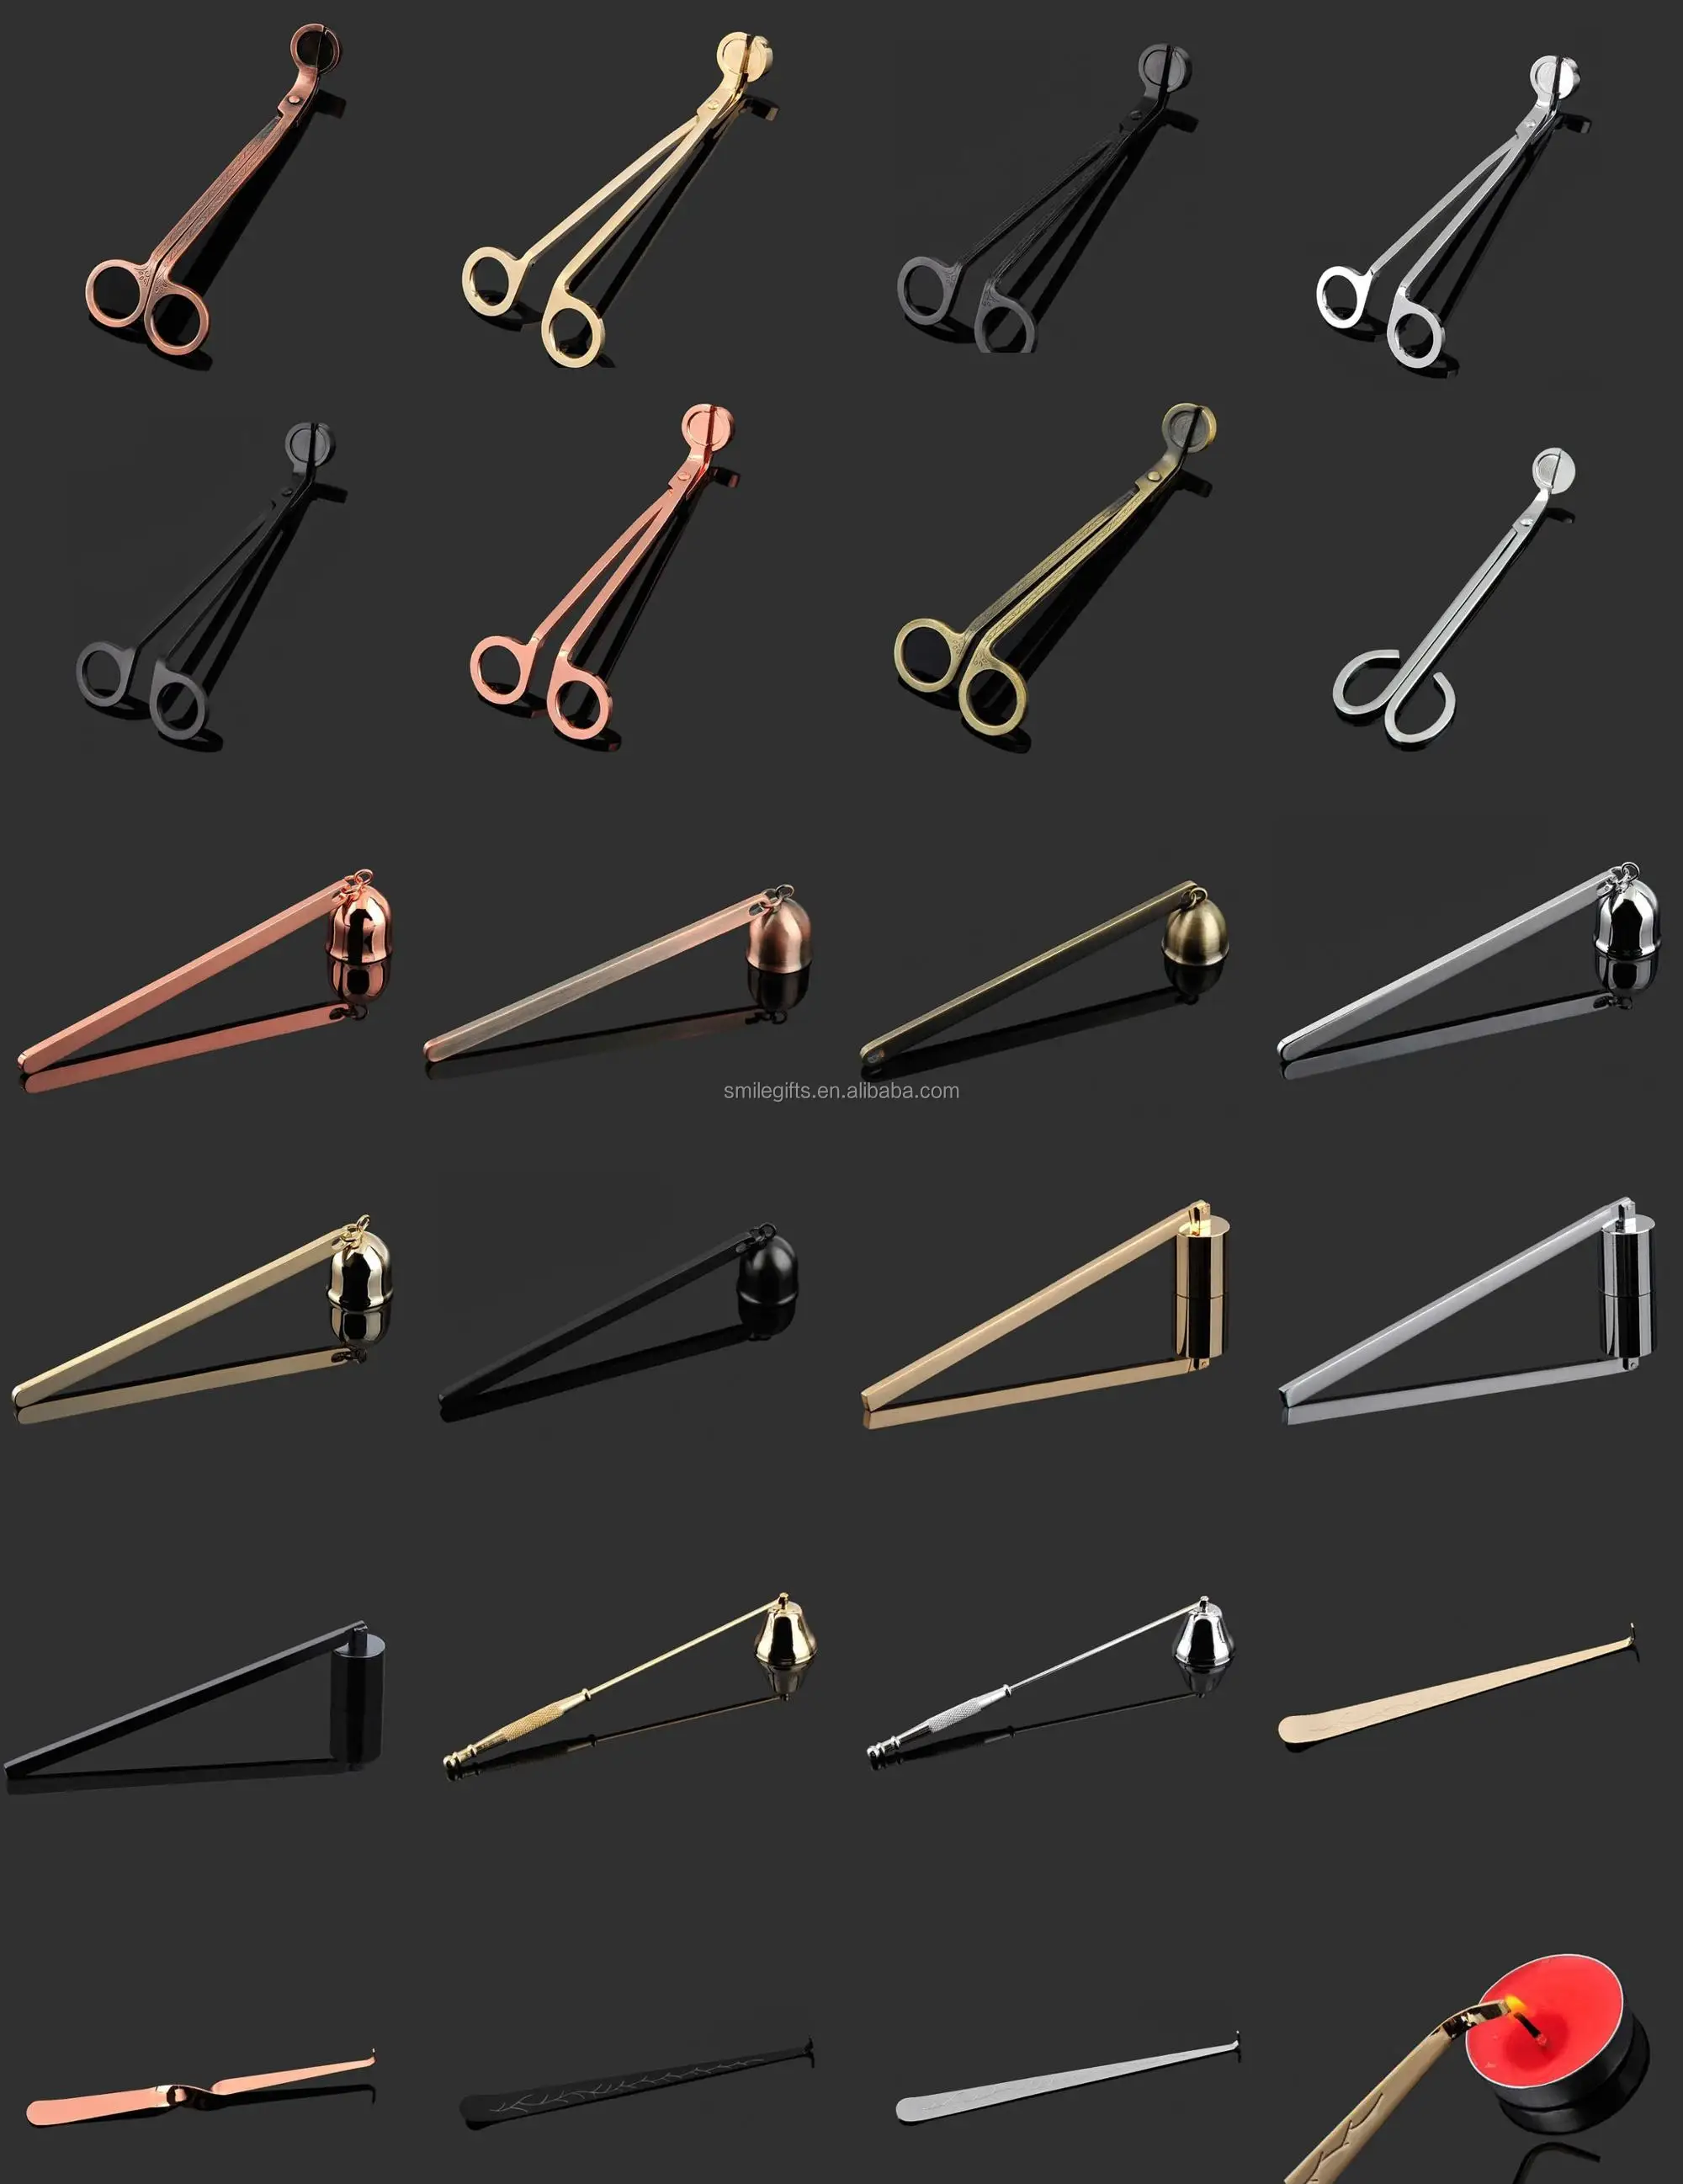 candle  tools.jpg